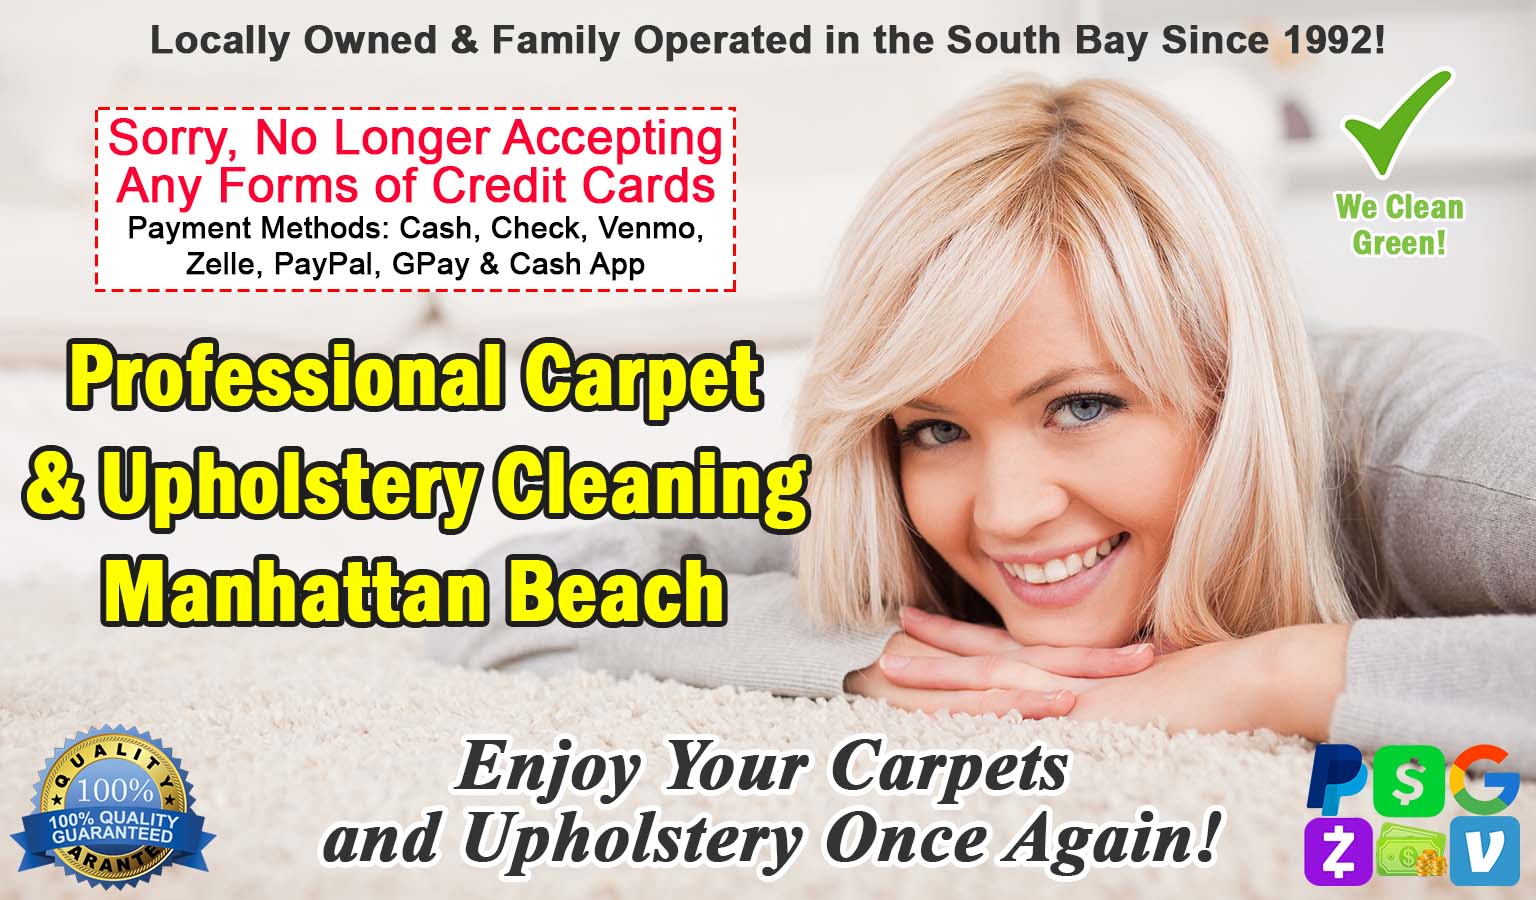 Carpet Cleaning and Upholstery Cleaning Manhattan Beach Ca